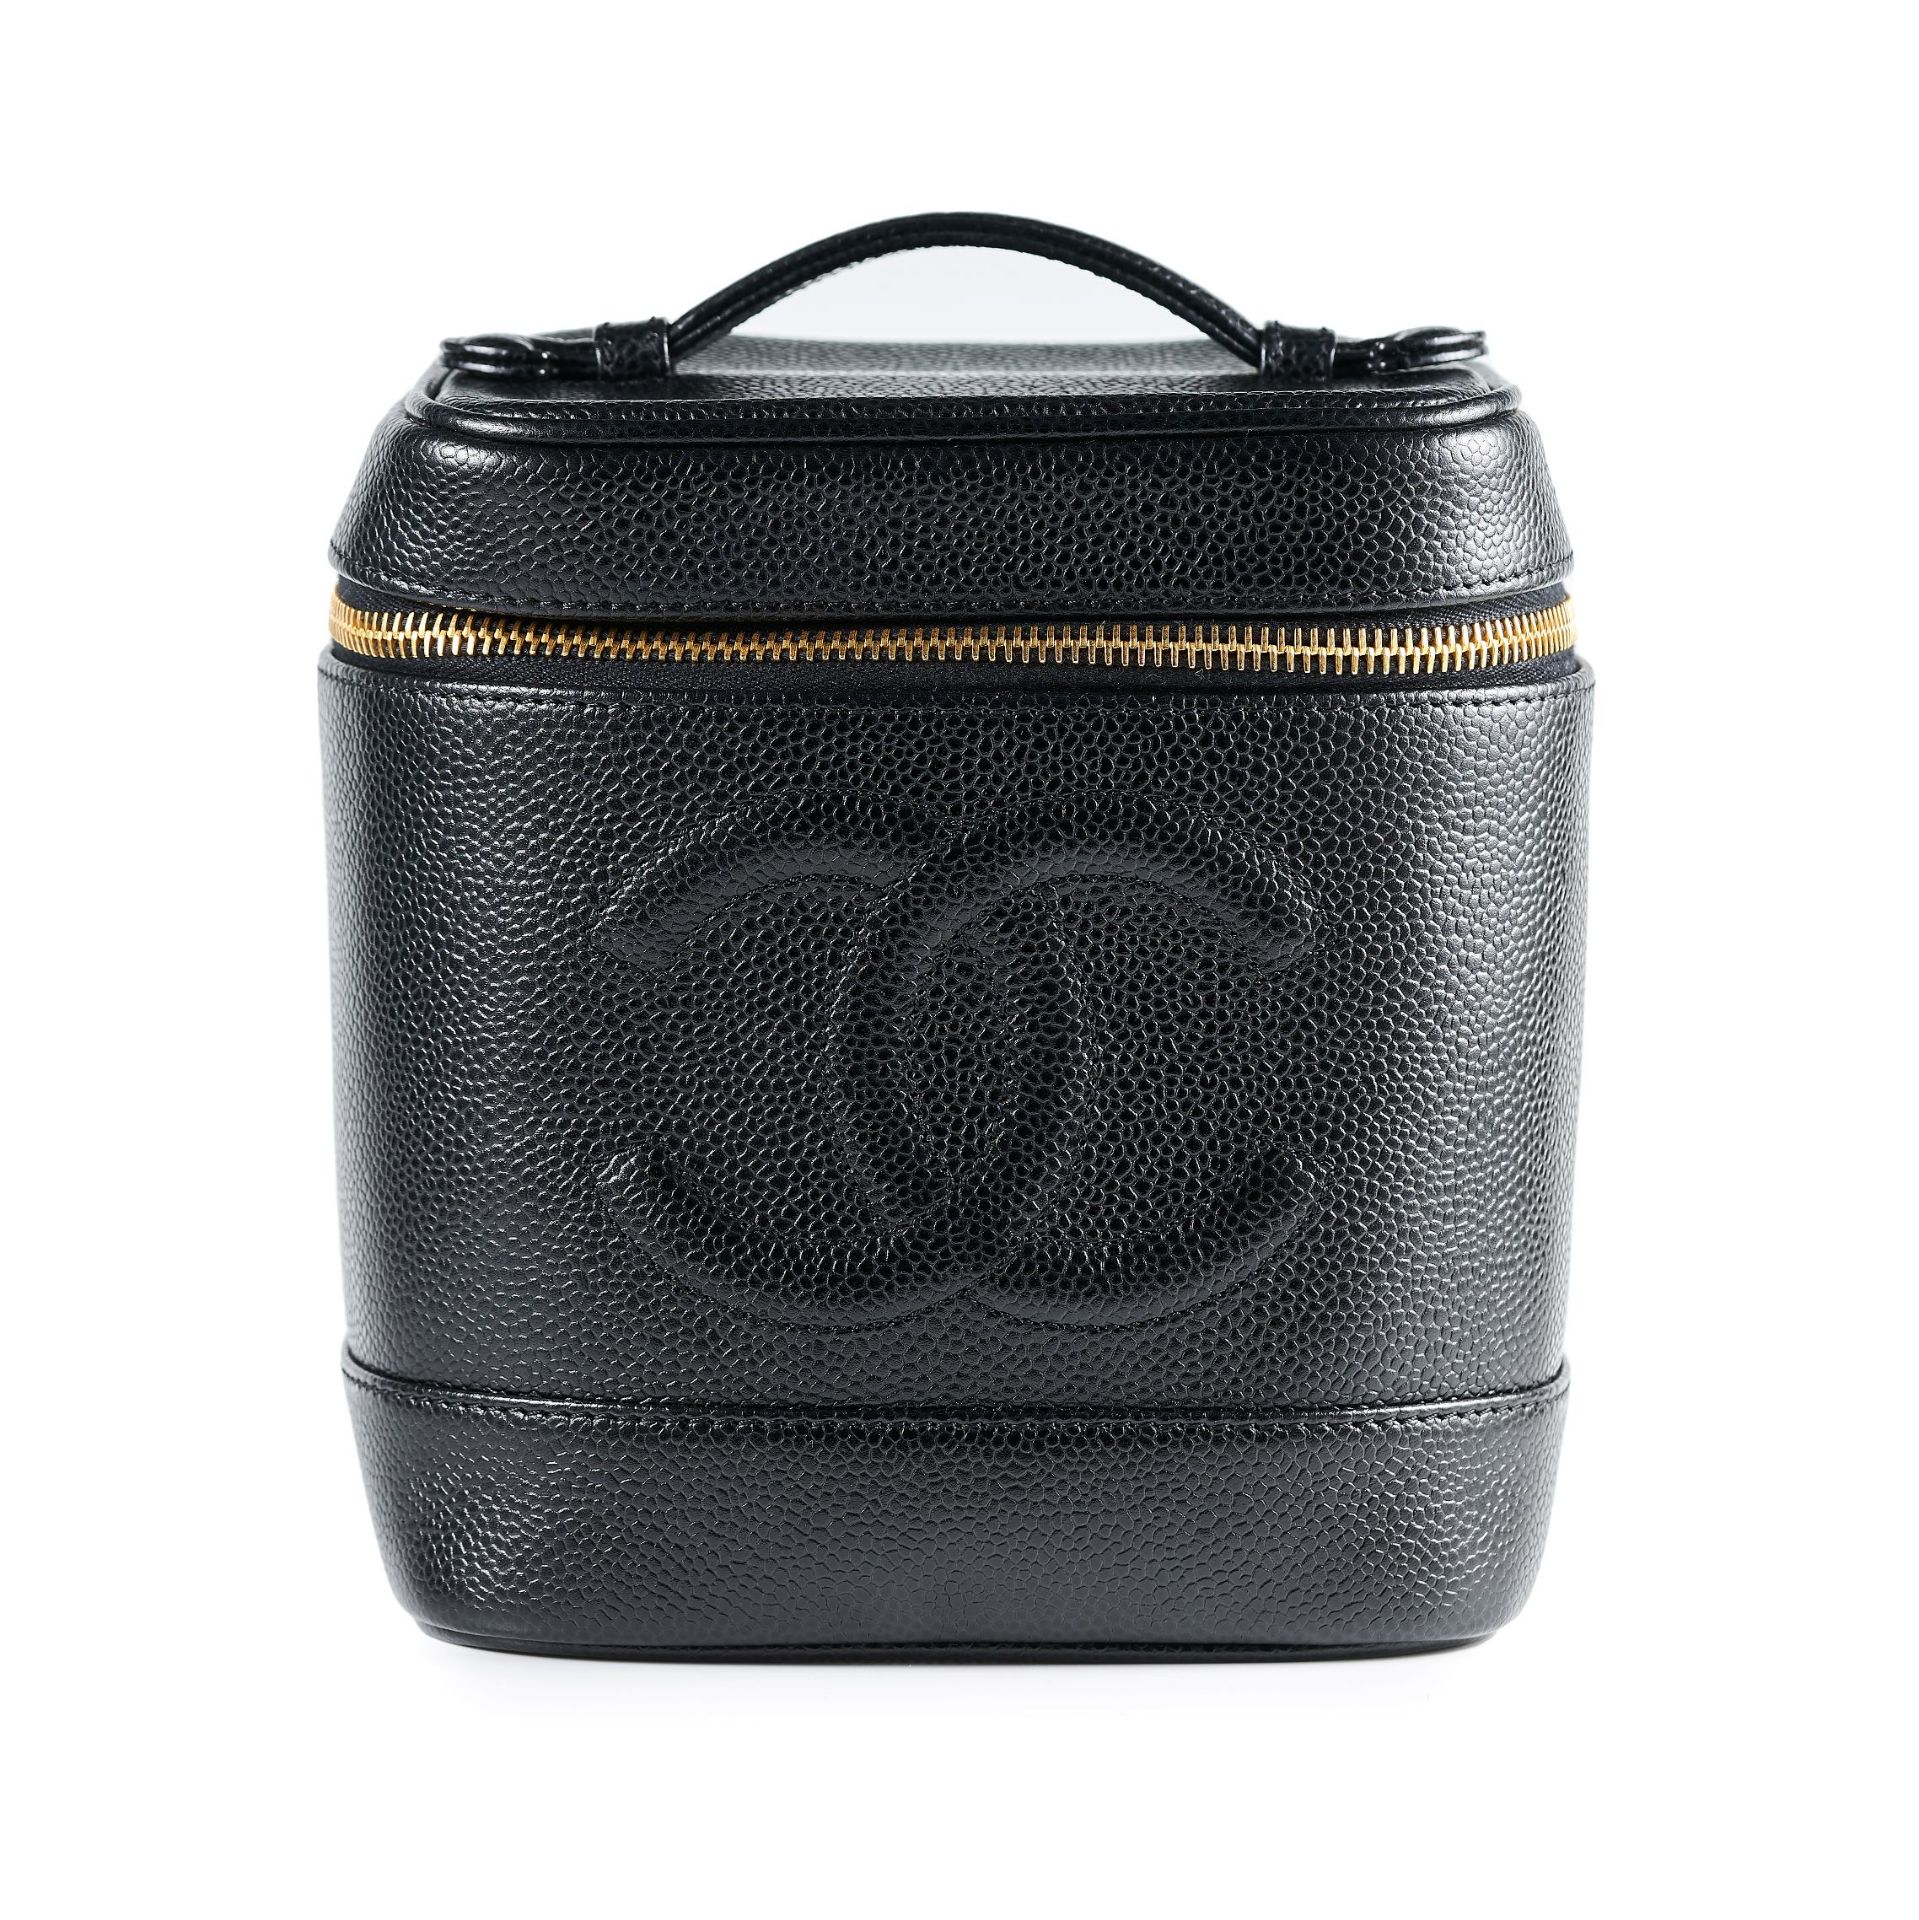 CHANEL, A LEATHER VANITY CASE calf leather, gold tone hardware, 16.0cm wide, 18.0cm high, includes